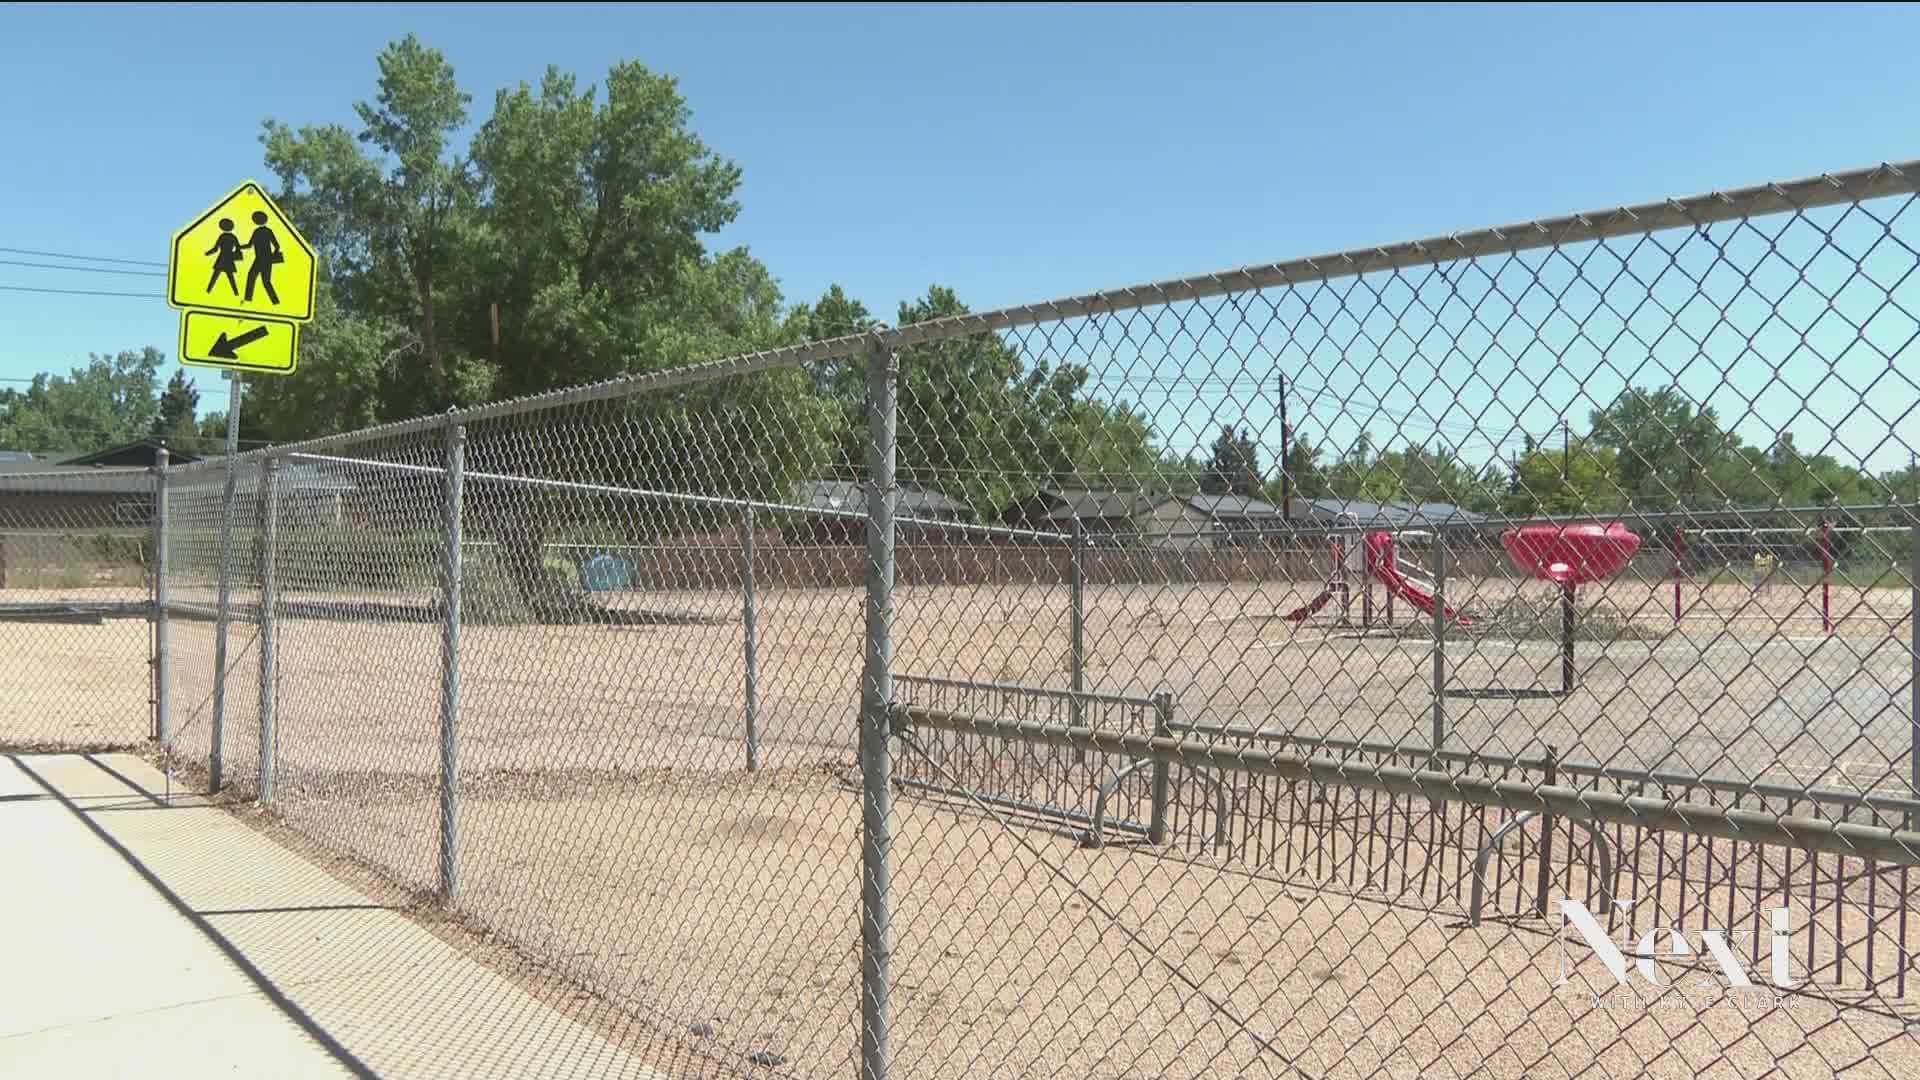 Colorado's second-largest school district has more than 27,000 empty seats. Now, the district is working on plans to close schools that aren't at capacity.